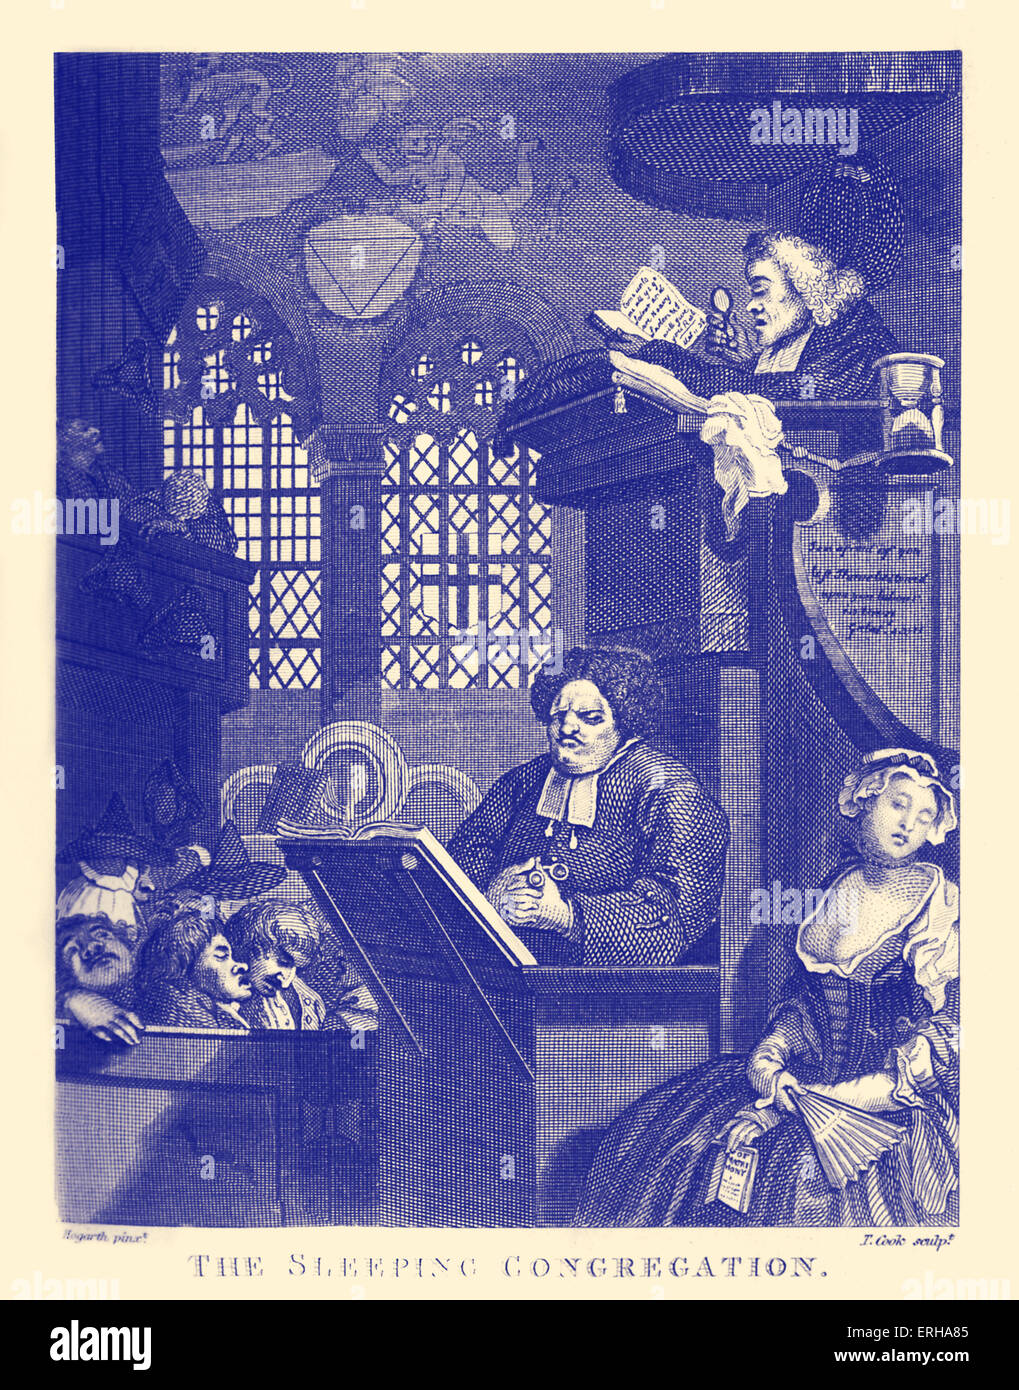 The Sleeping Congregation, (1736), engraving by William Hogarth. A parish clerk watches a sleeping Sunday congregation, while Stock Photo